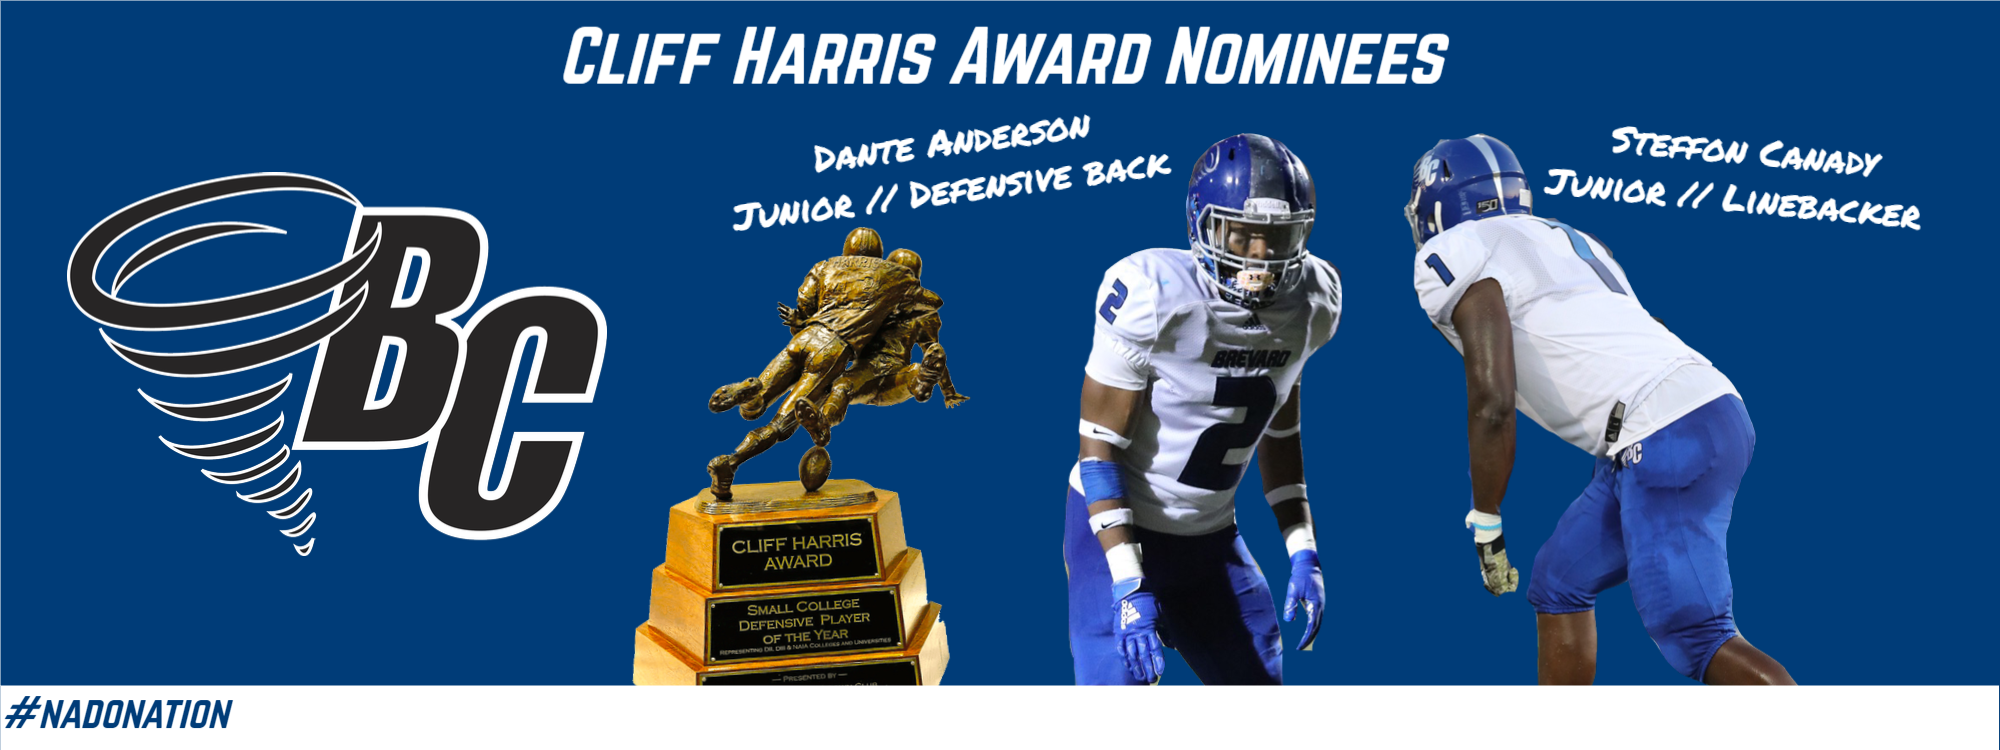 Anderson, Canady Selected as Nominees for Cliff Harris Award